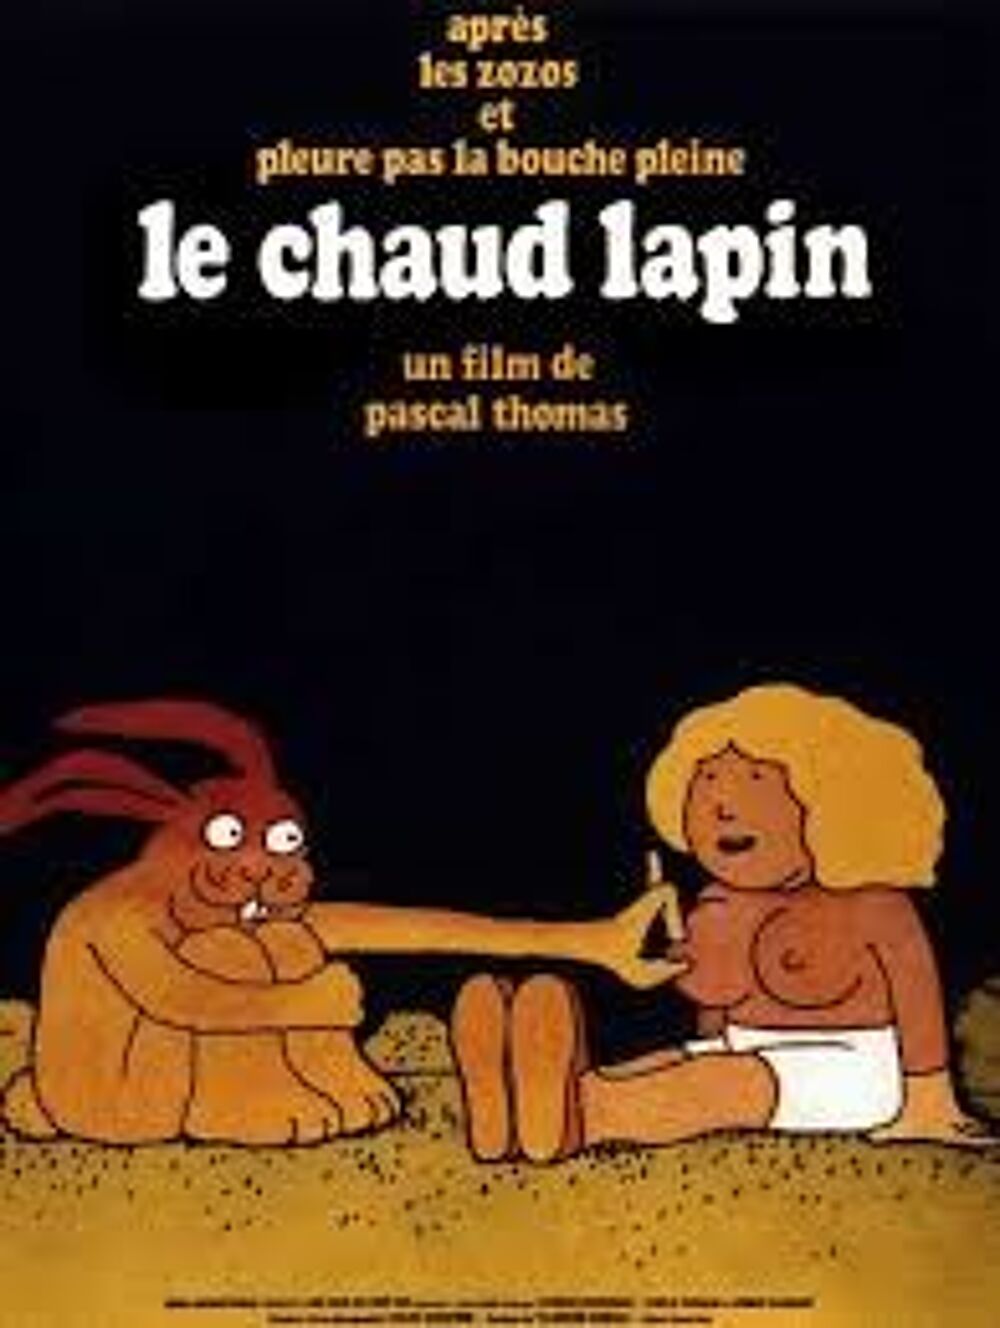 K7 Vhs: le chaud lapin (232) DVD et blu-ray